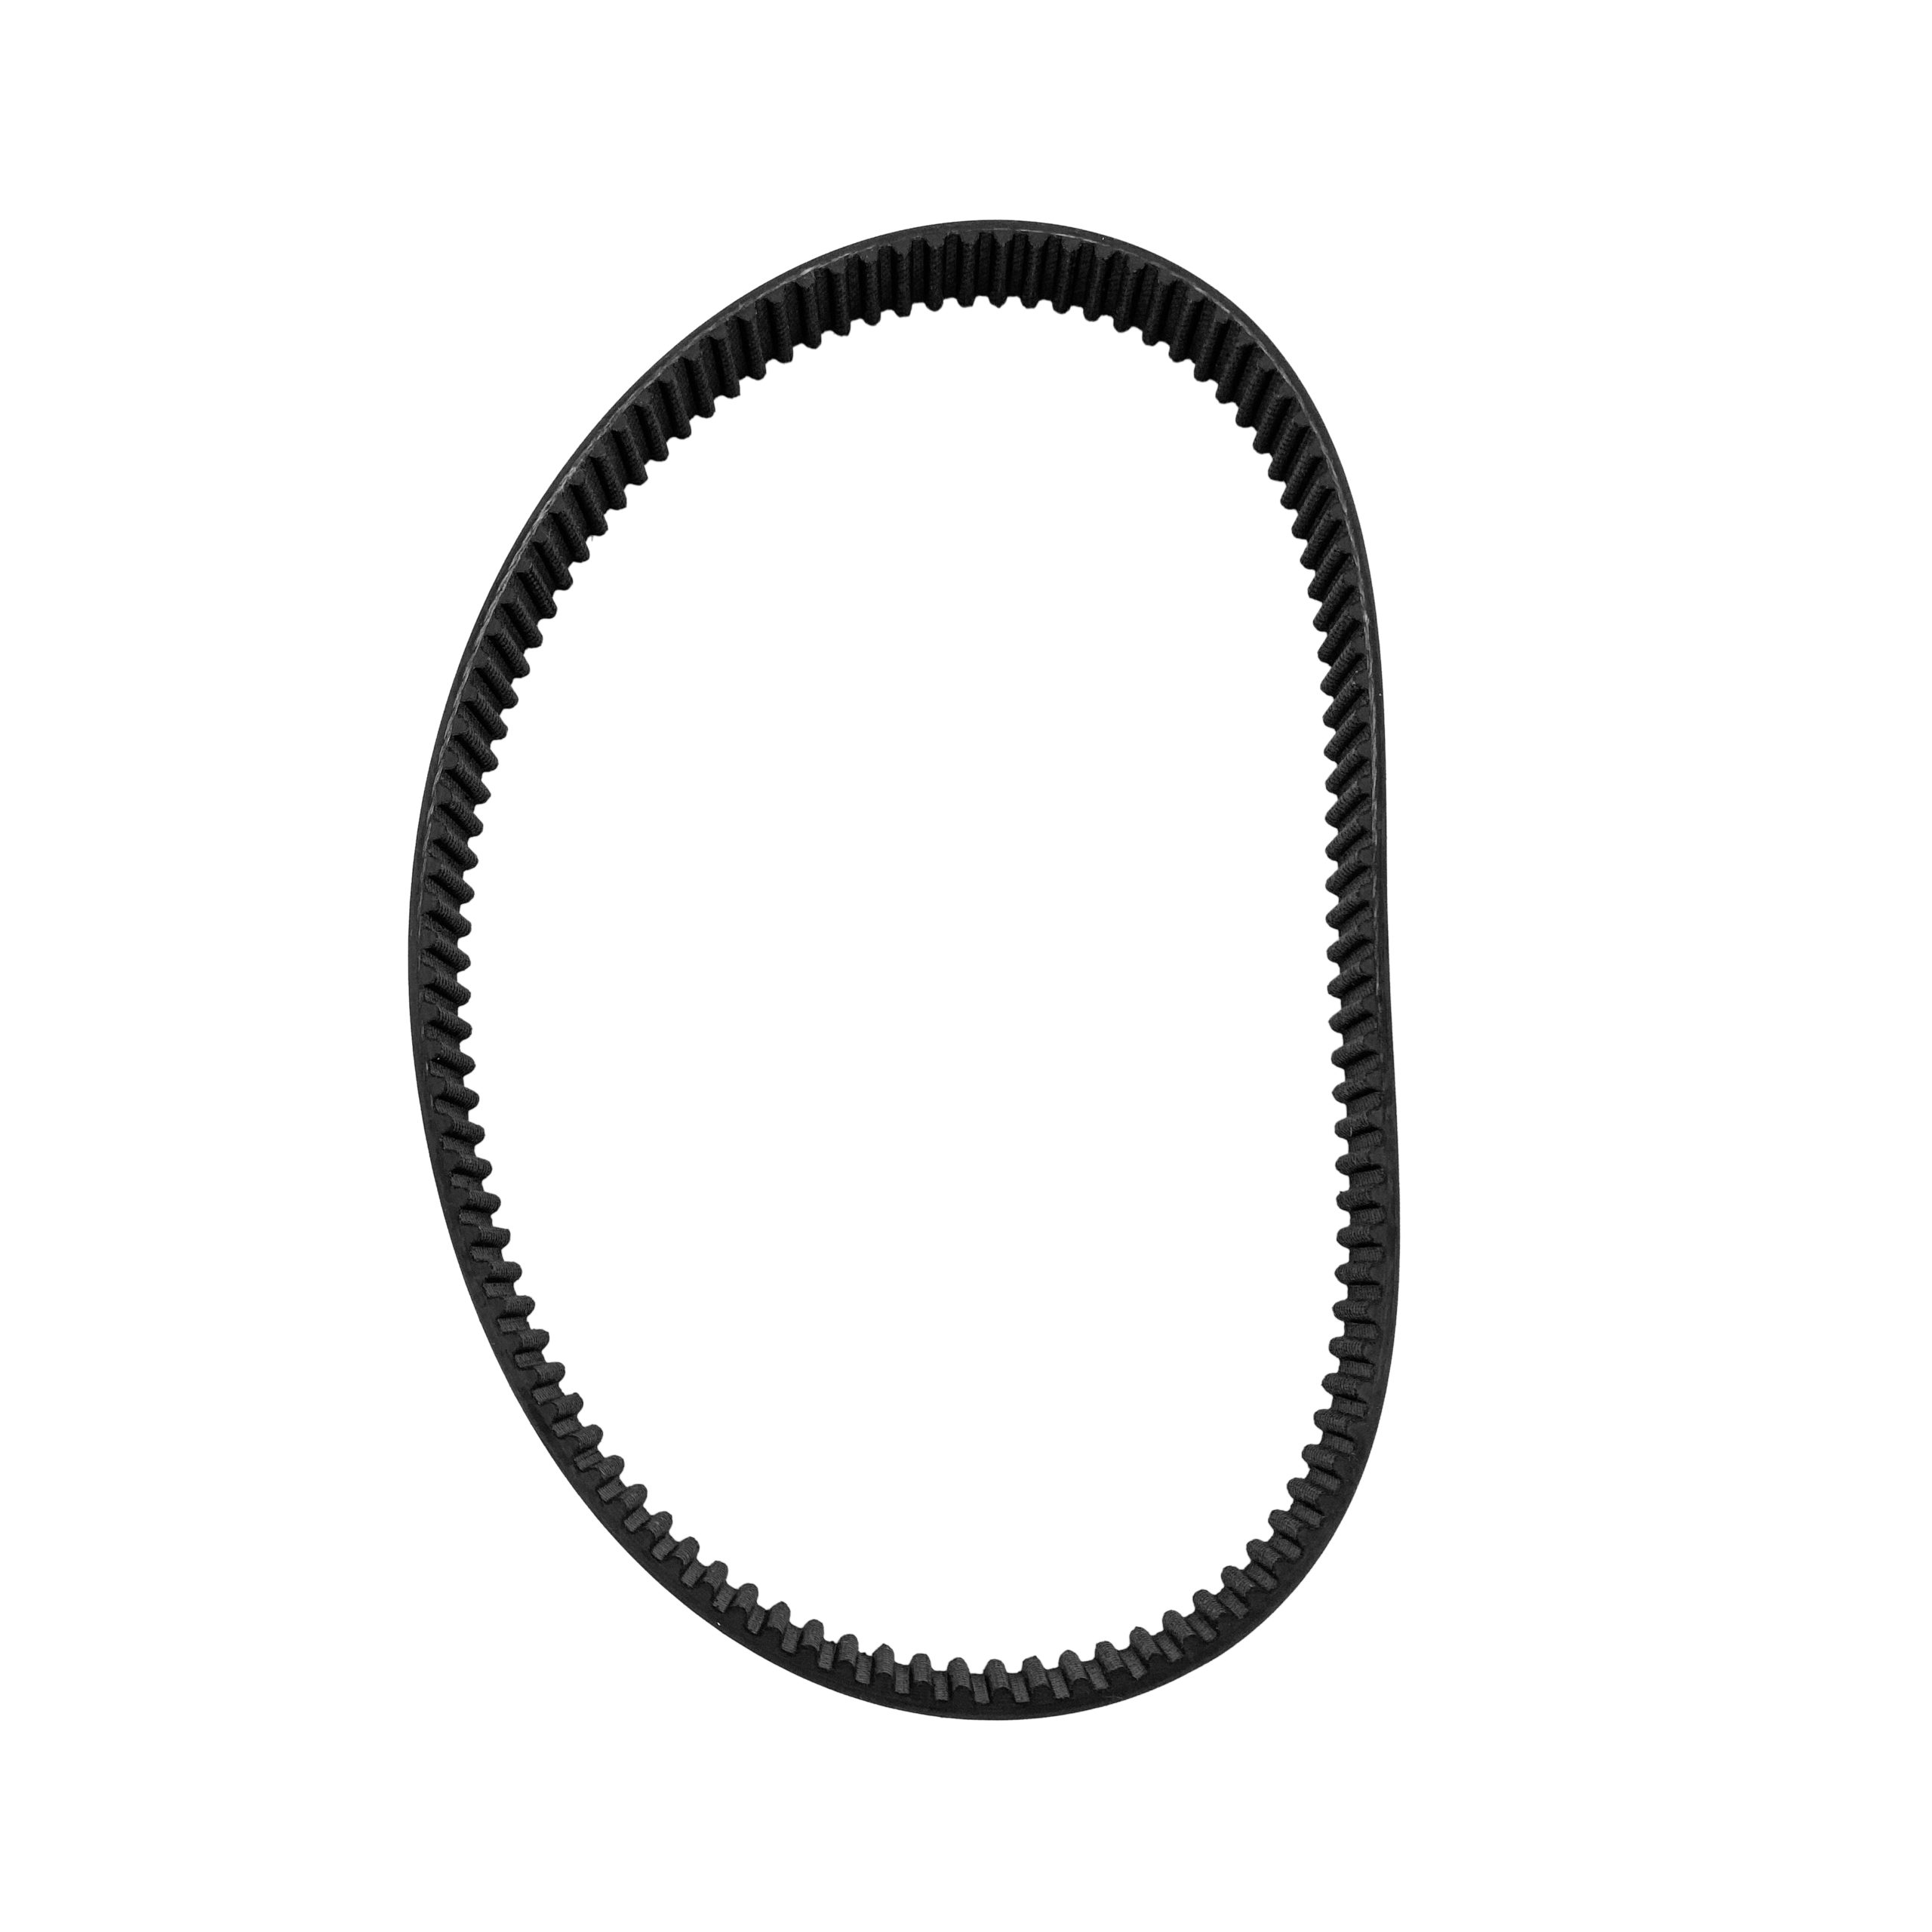 Haas HRT 310 Drive Belt Replace the drive belt on your HRT 310 with this belt.